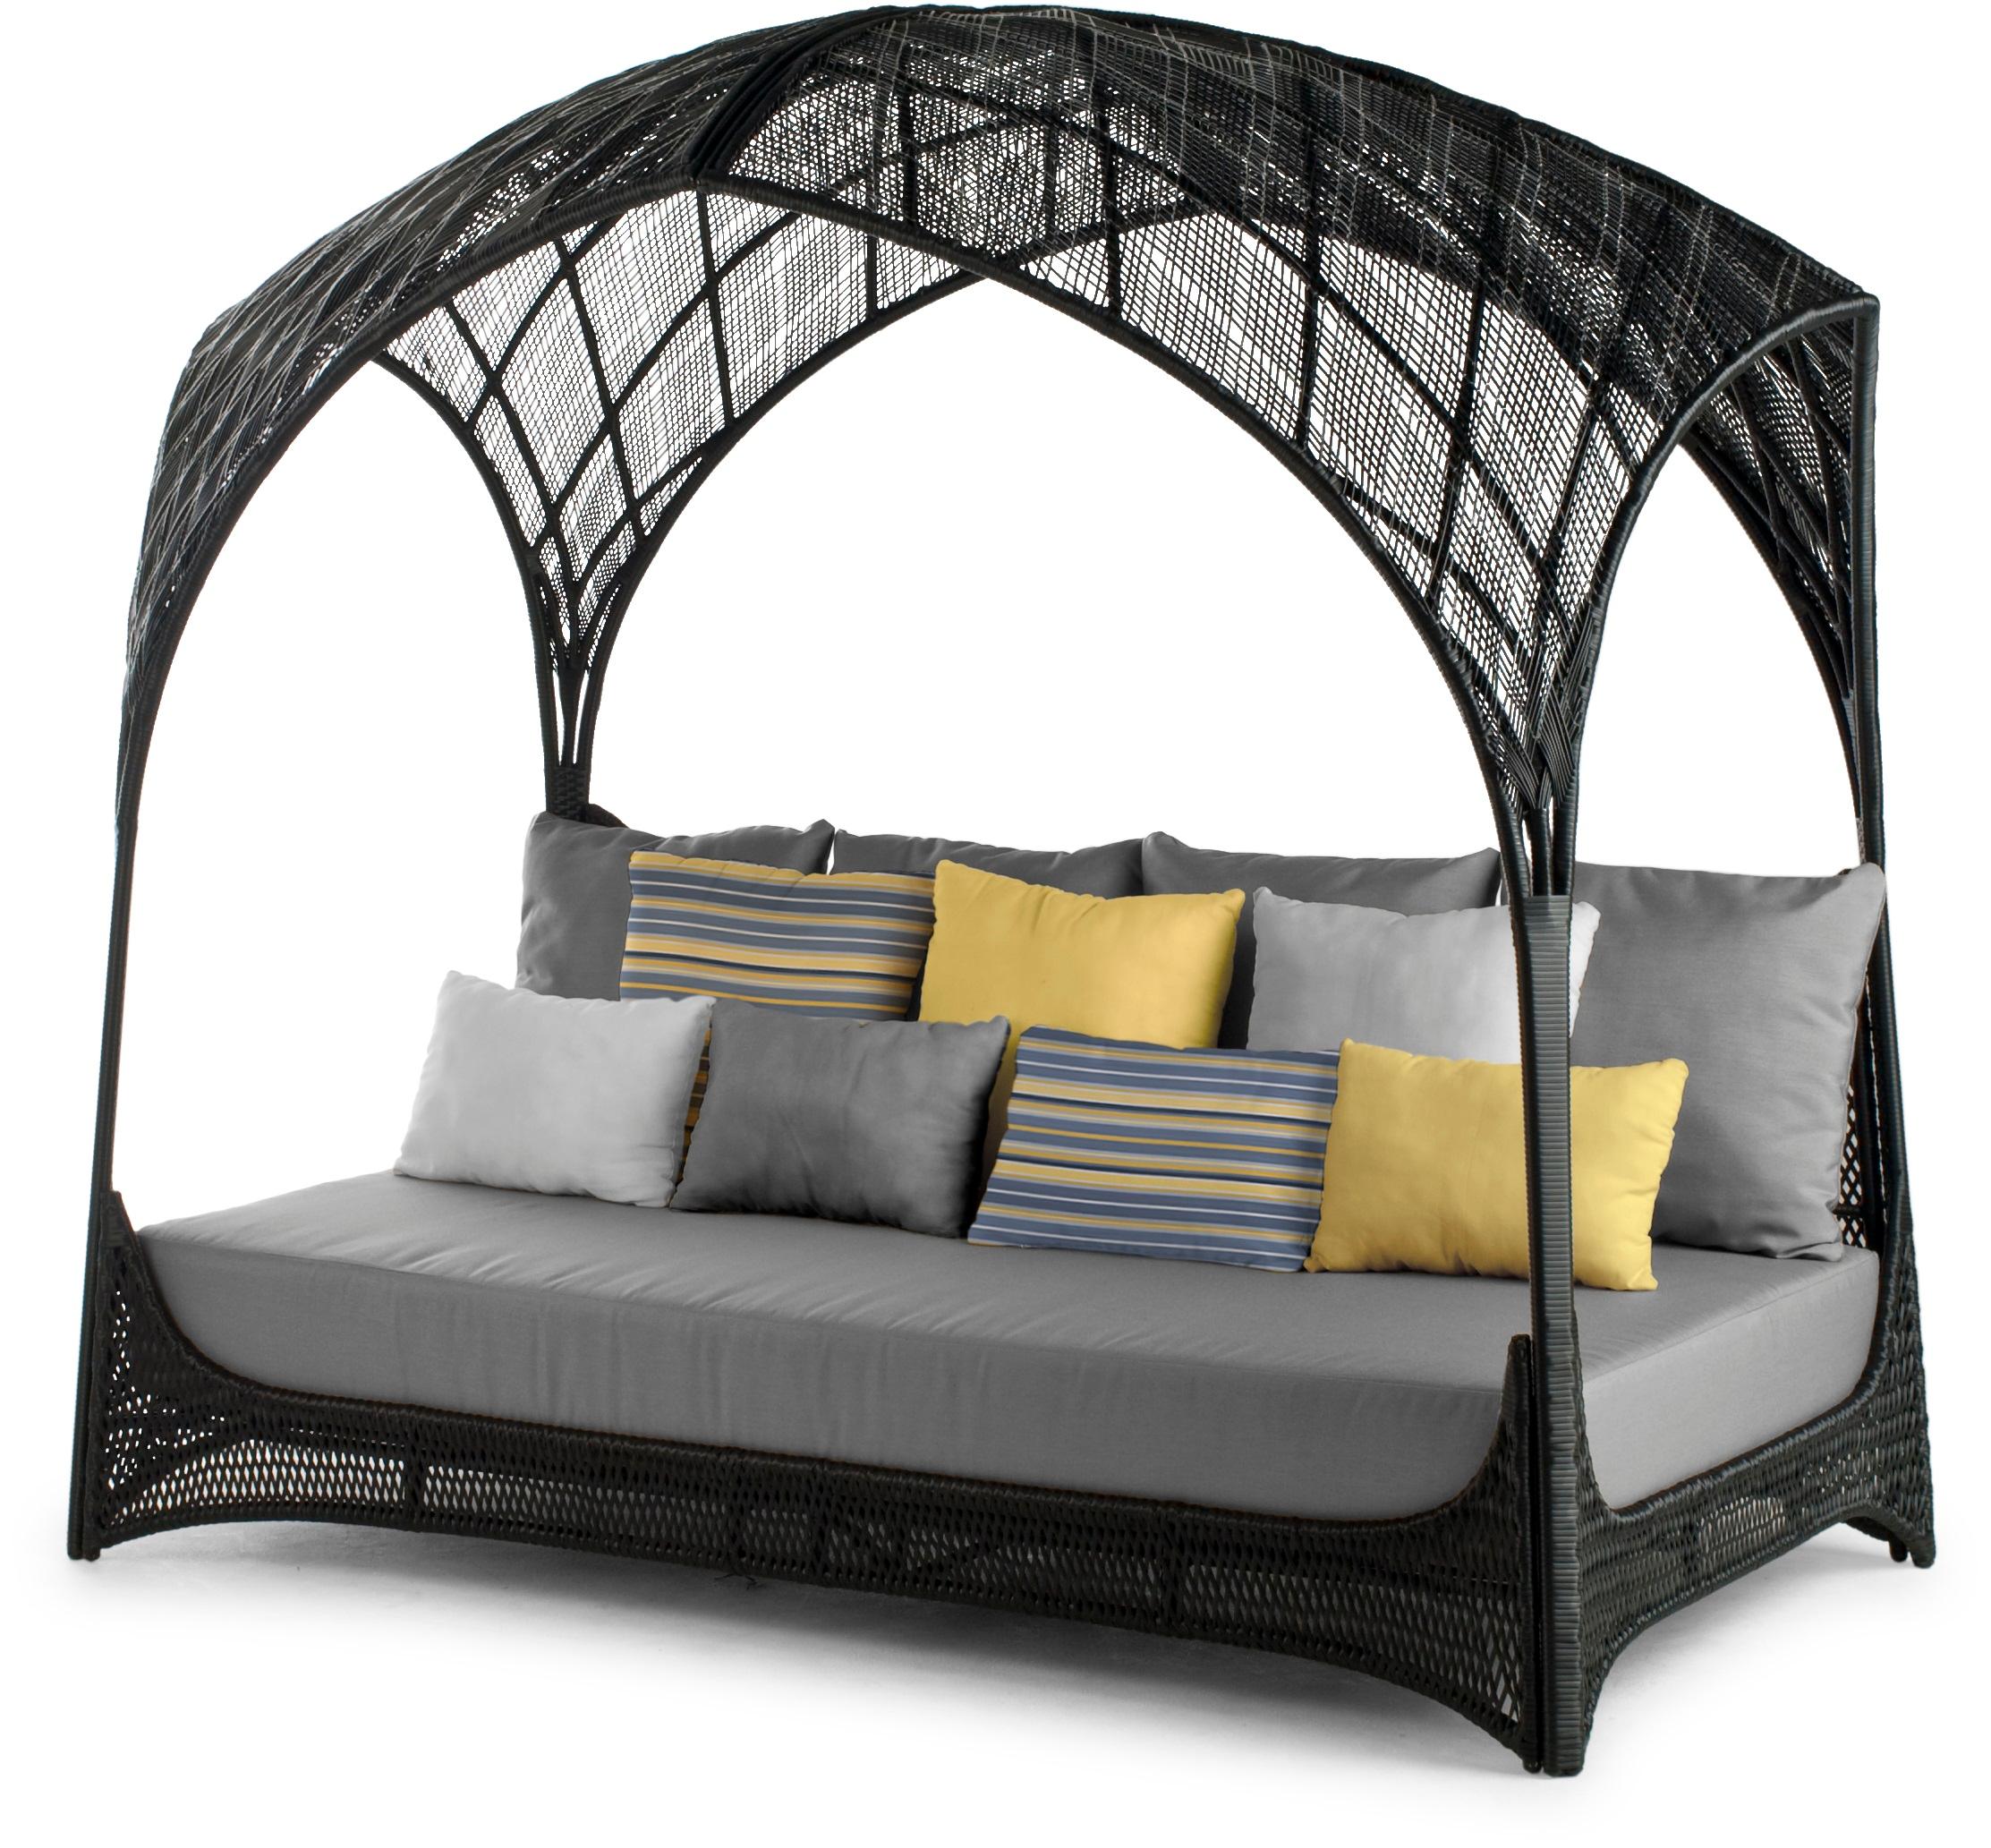 gothic daybed